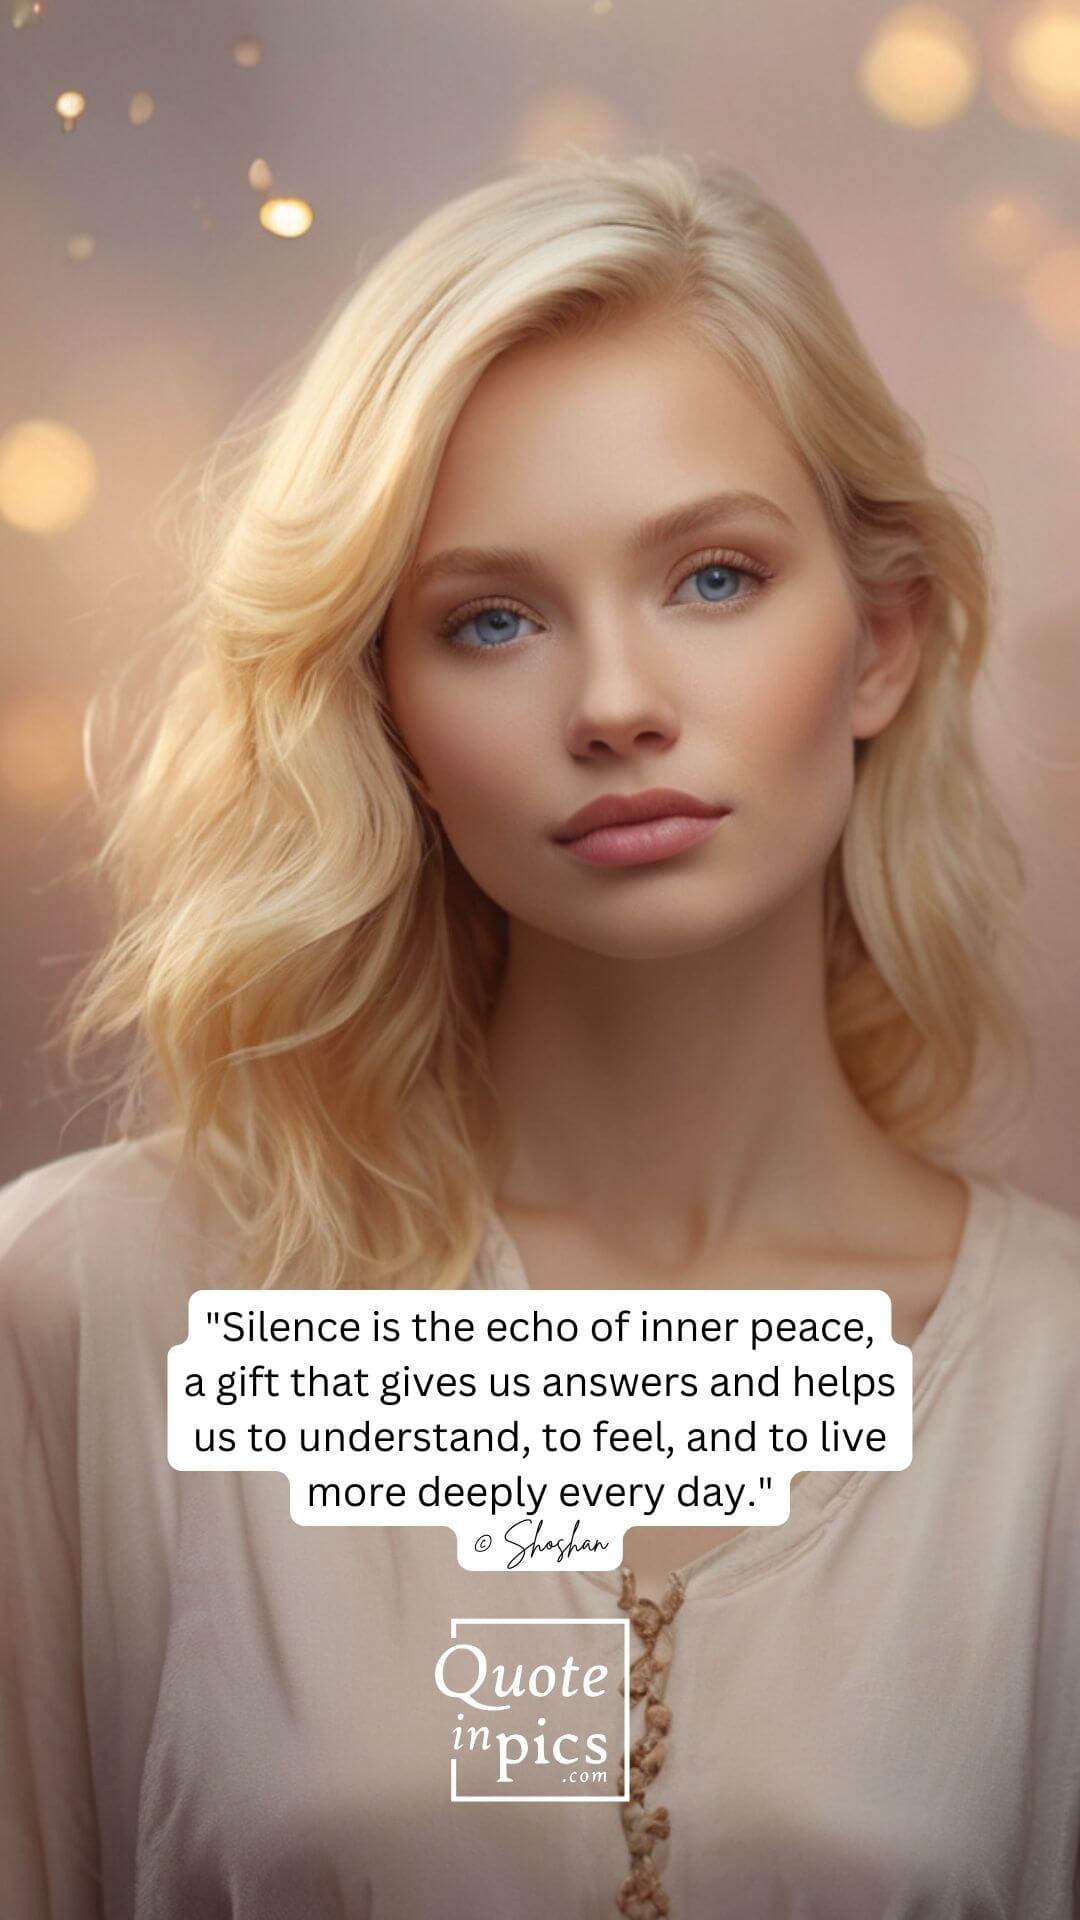 Silence is the echo of inner peace, a gift that gives us answers